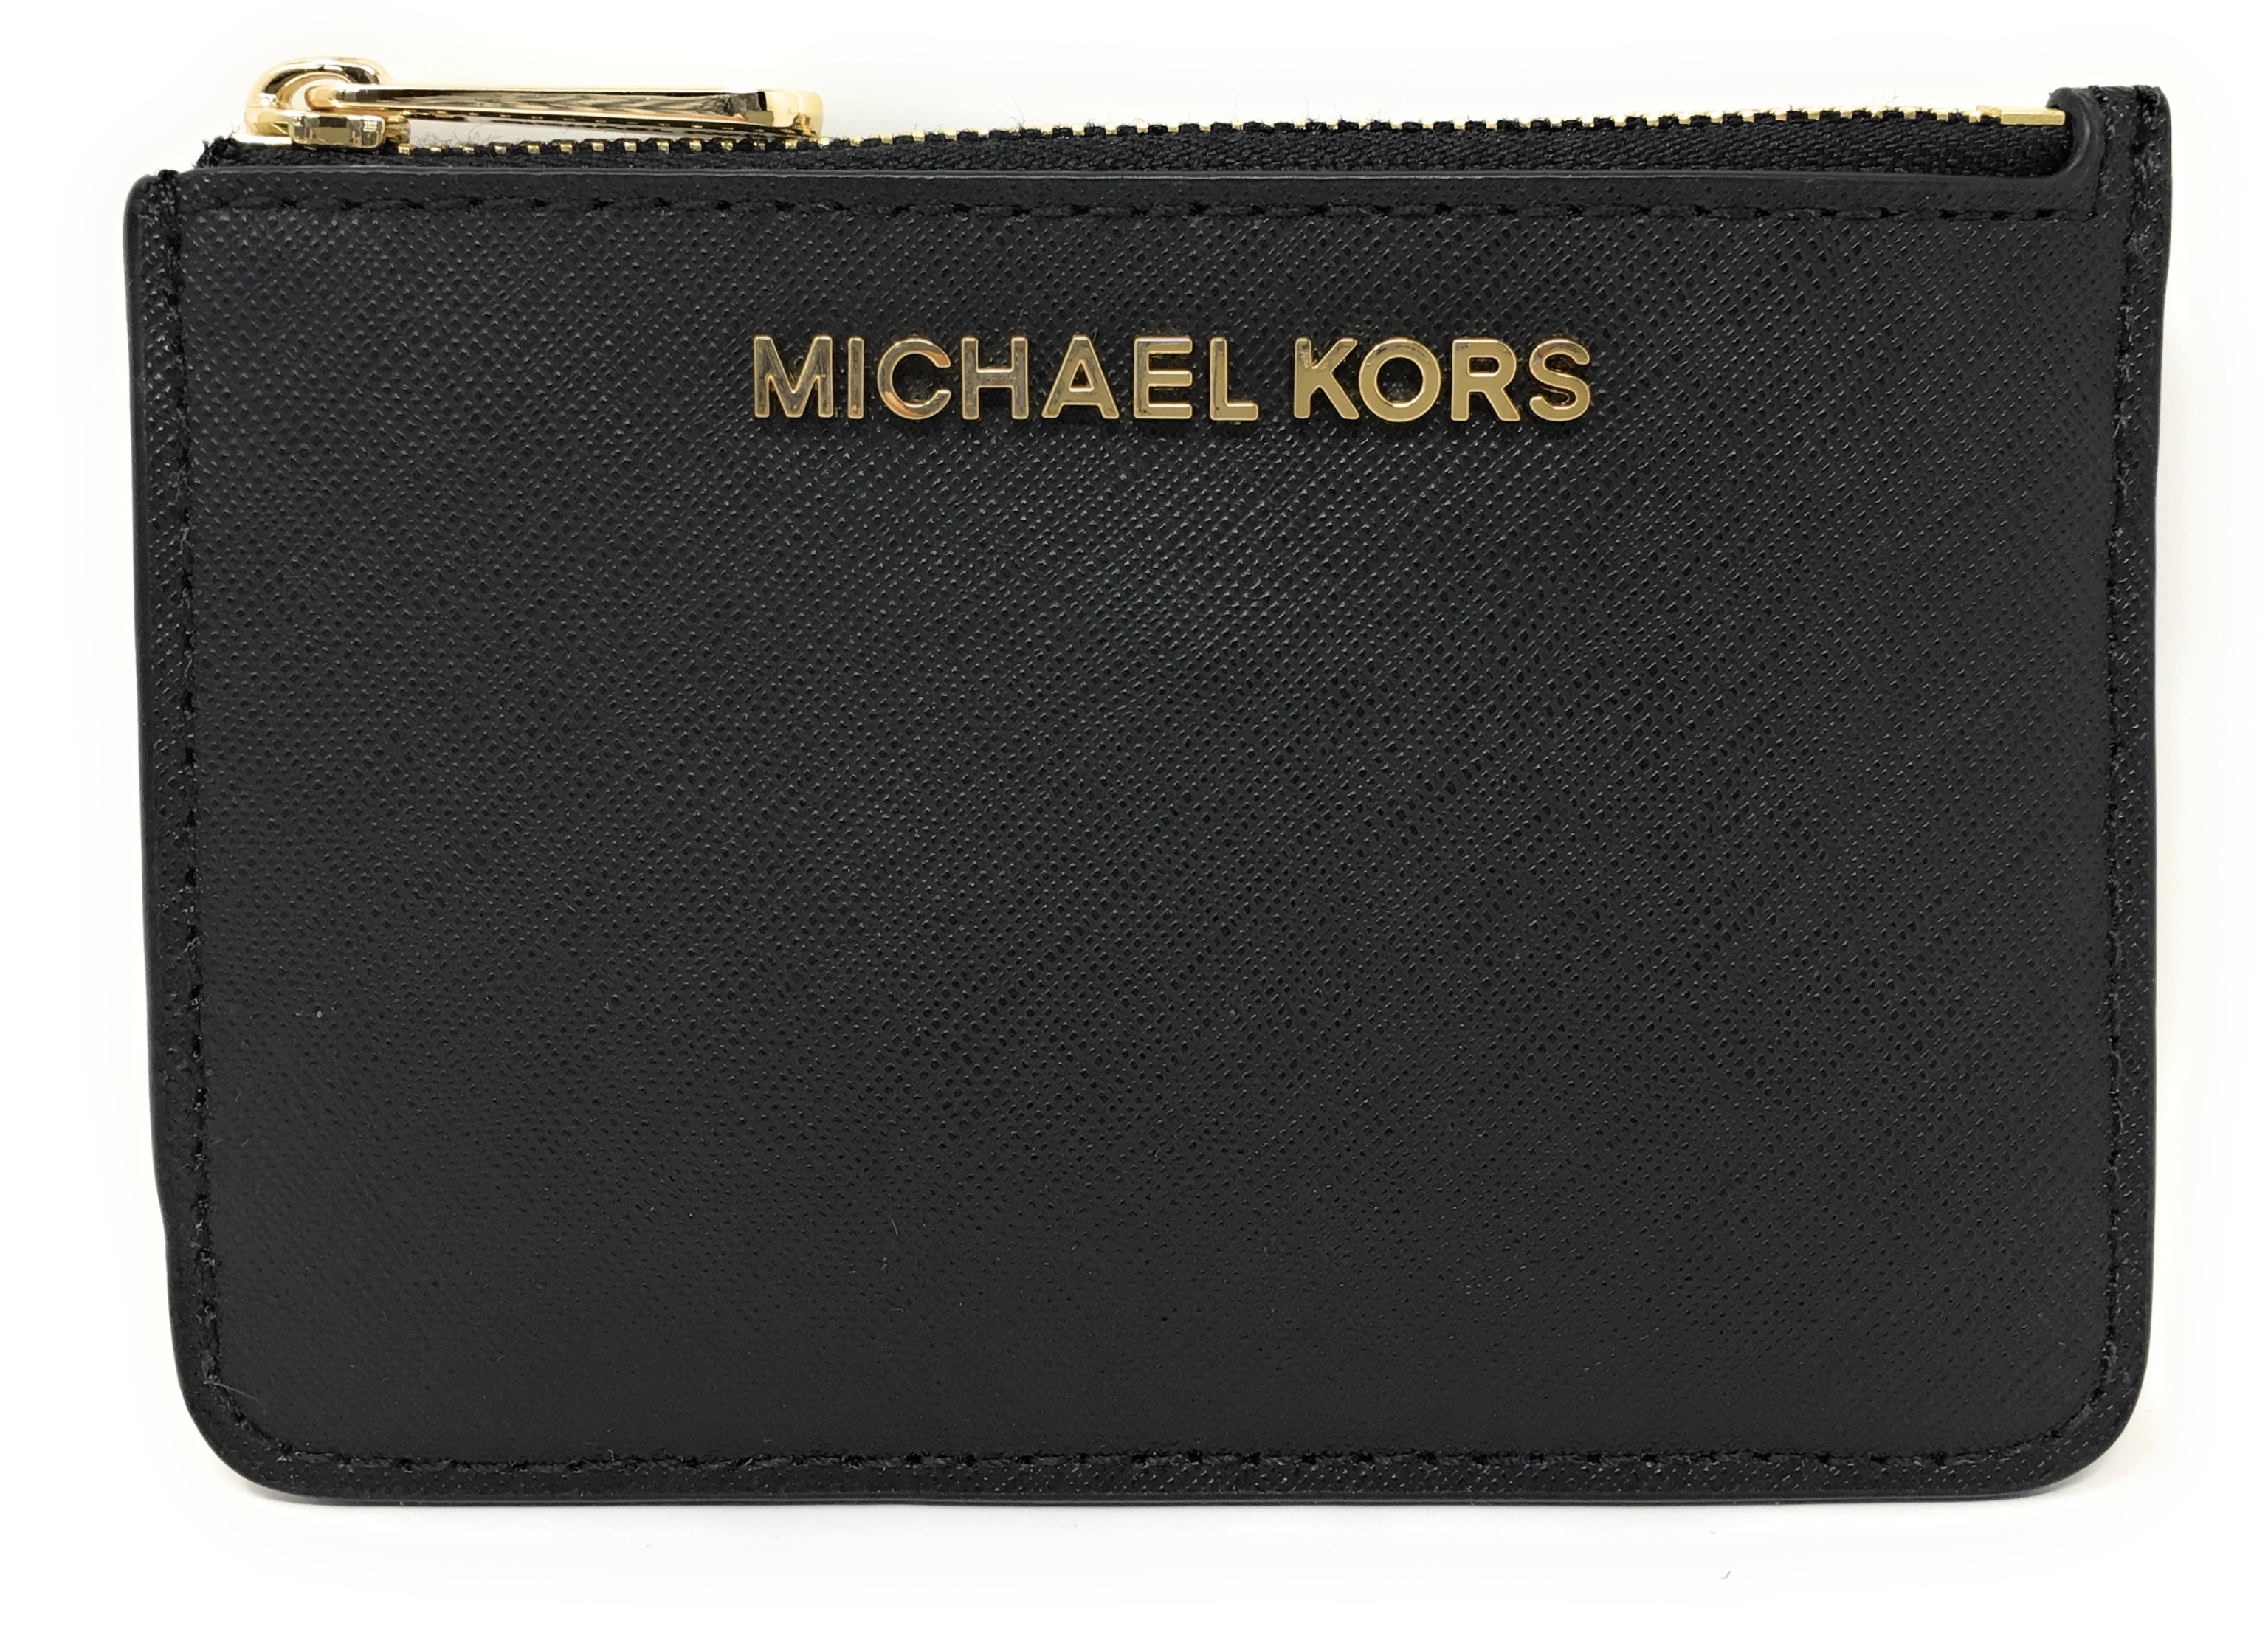 Michael Kors Jet Set Travel Small Top Zip Leather Coin Pouch / Wallet - Black - image 1 of 7